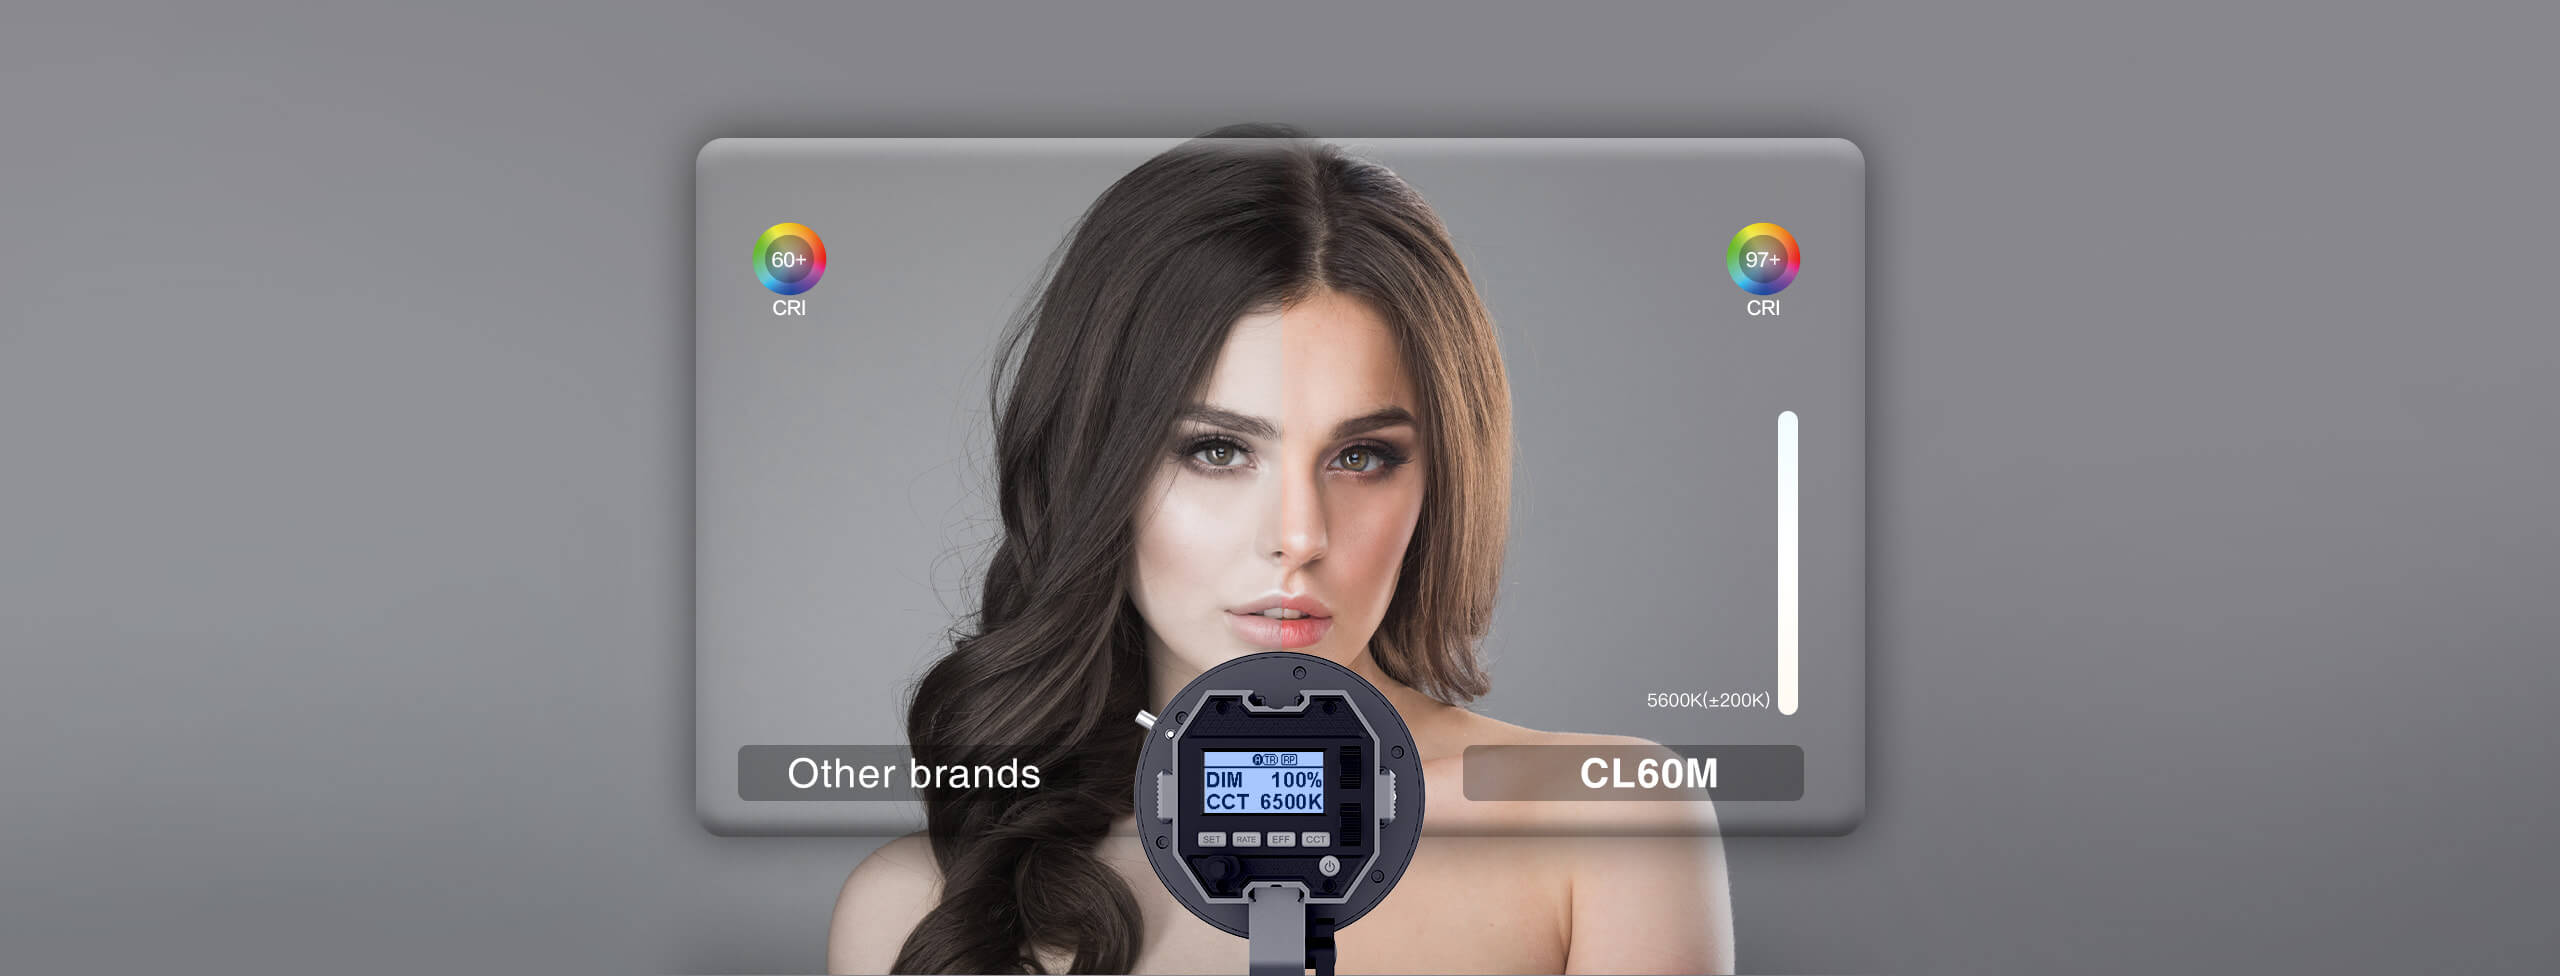 COLBOR CL60M features a CRI of 97+ and 5600K color temperature.